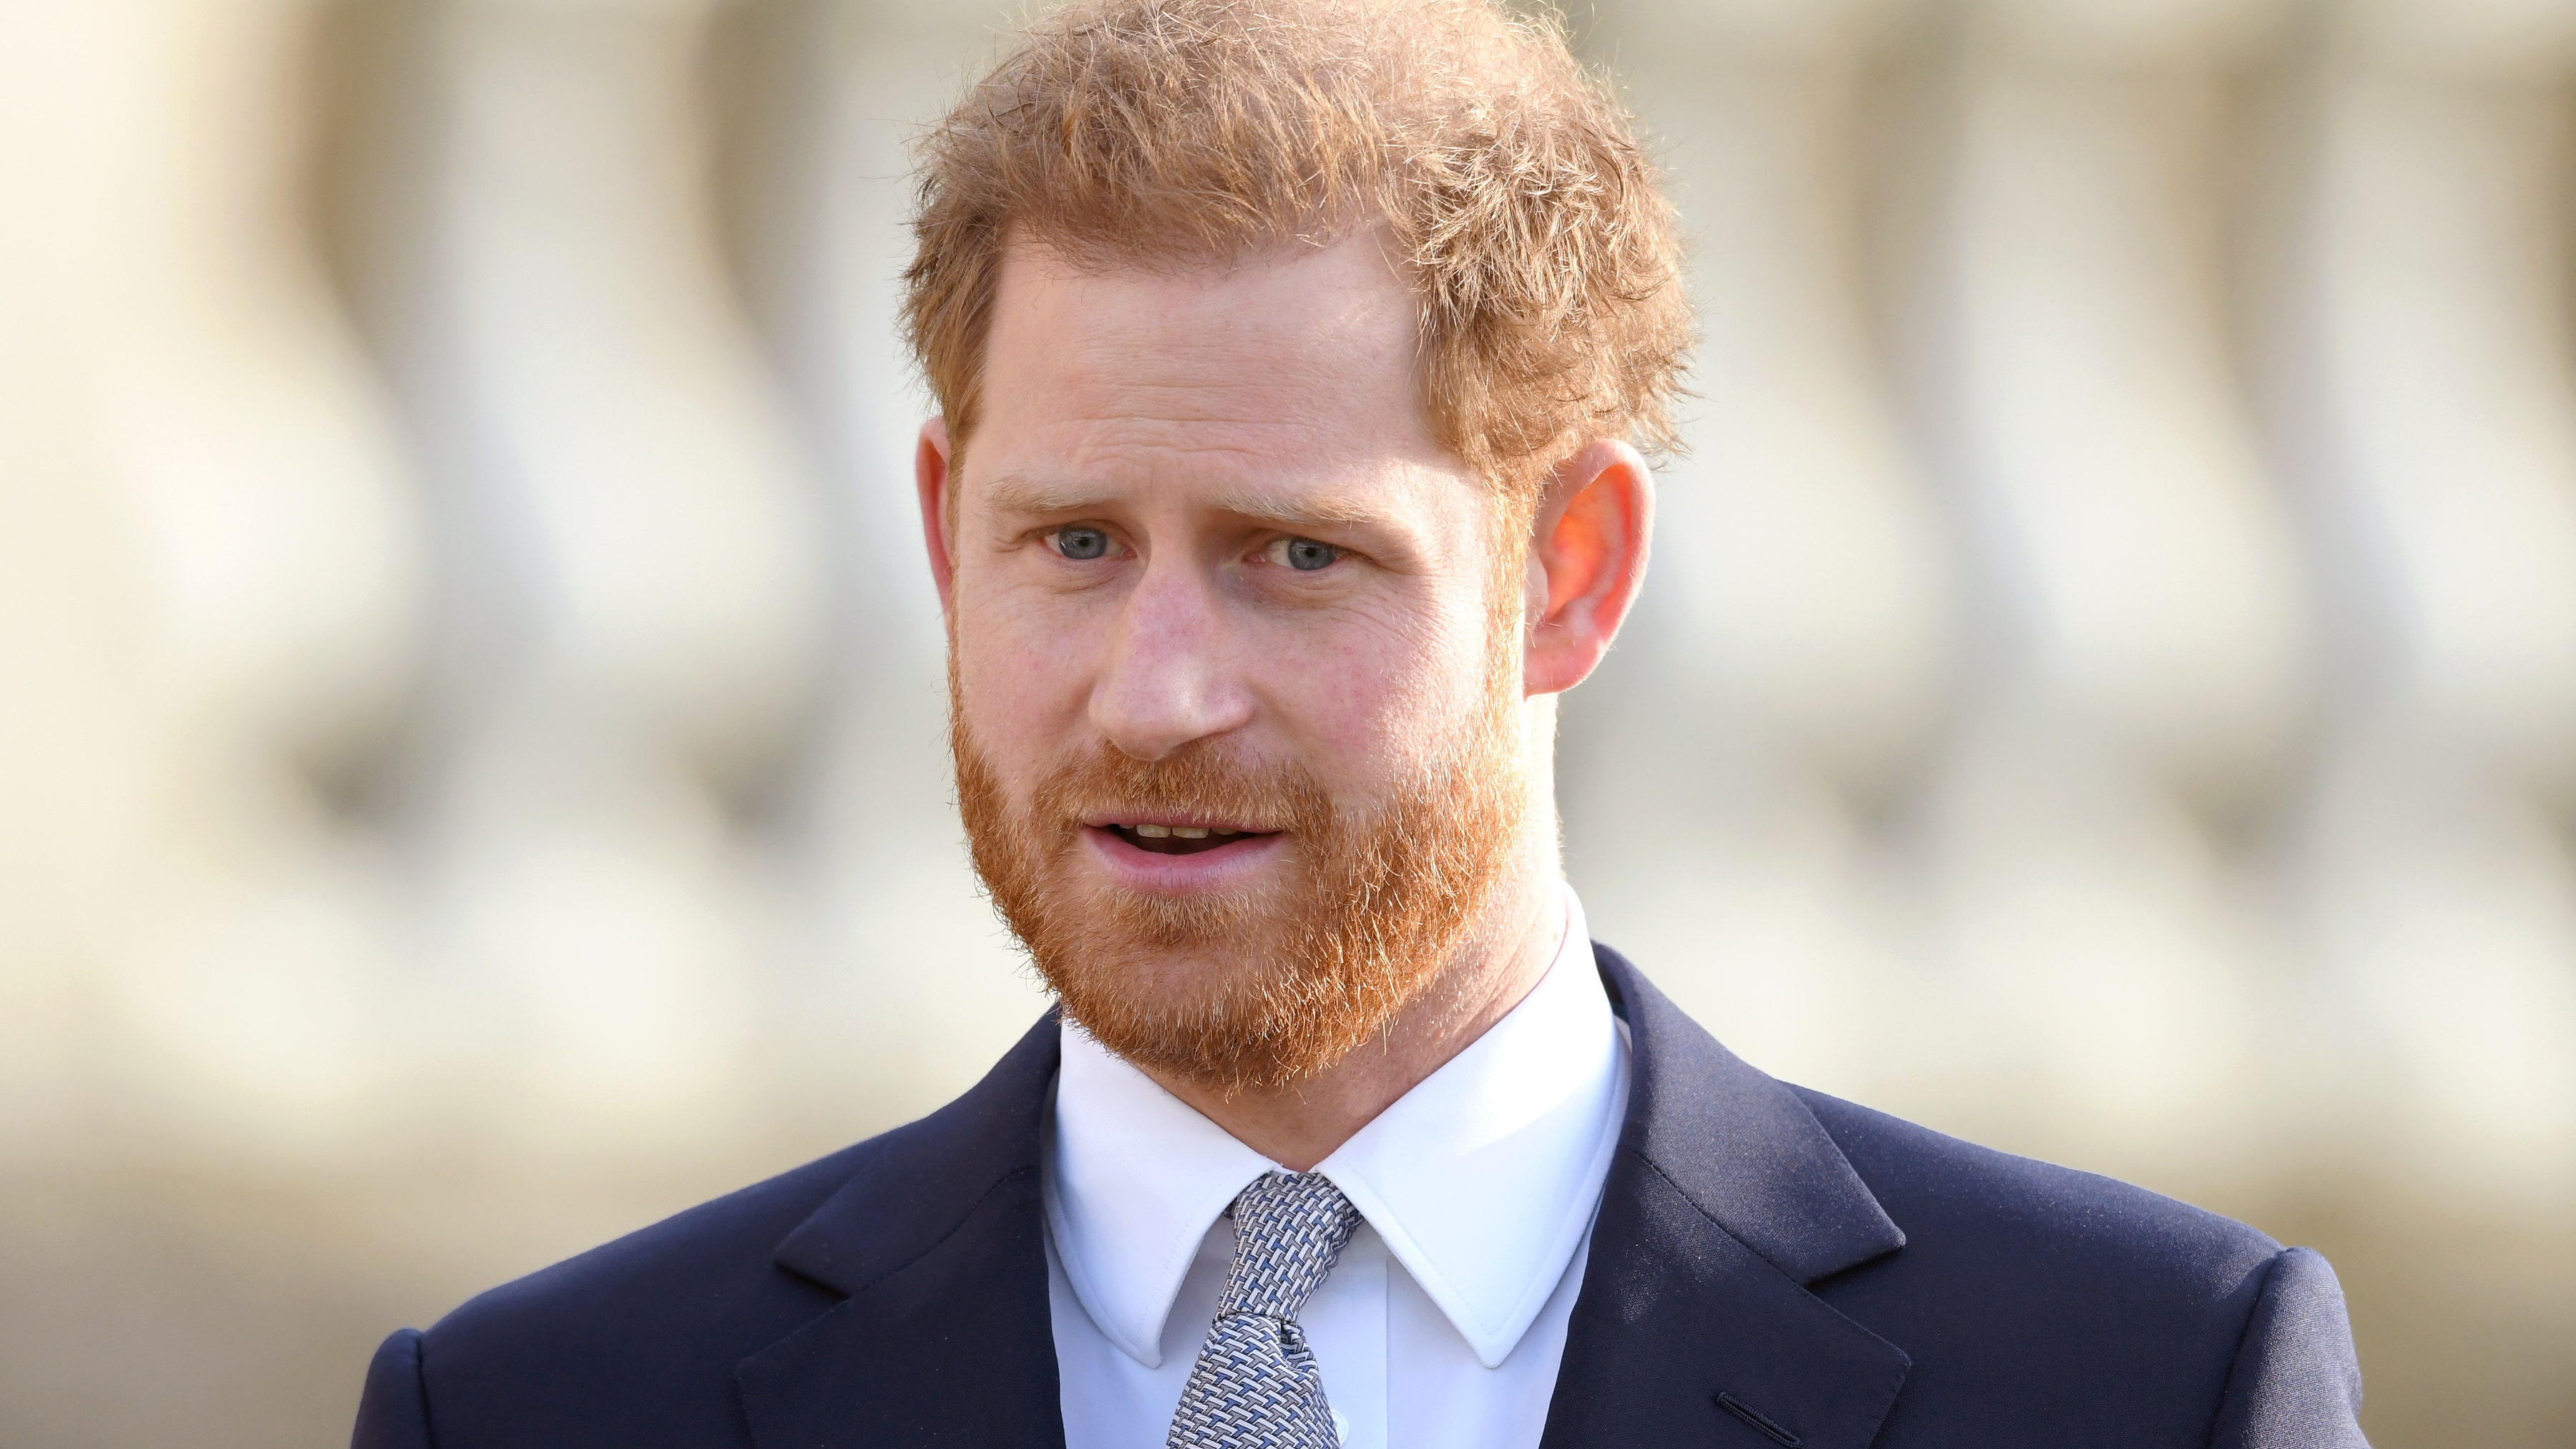 Prince Harry addresses Capitol riots and says social media played a role: ‘No way to downplay it’